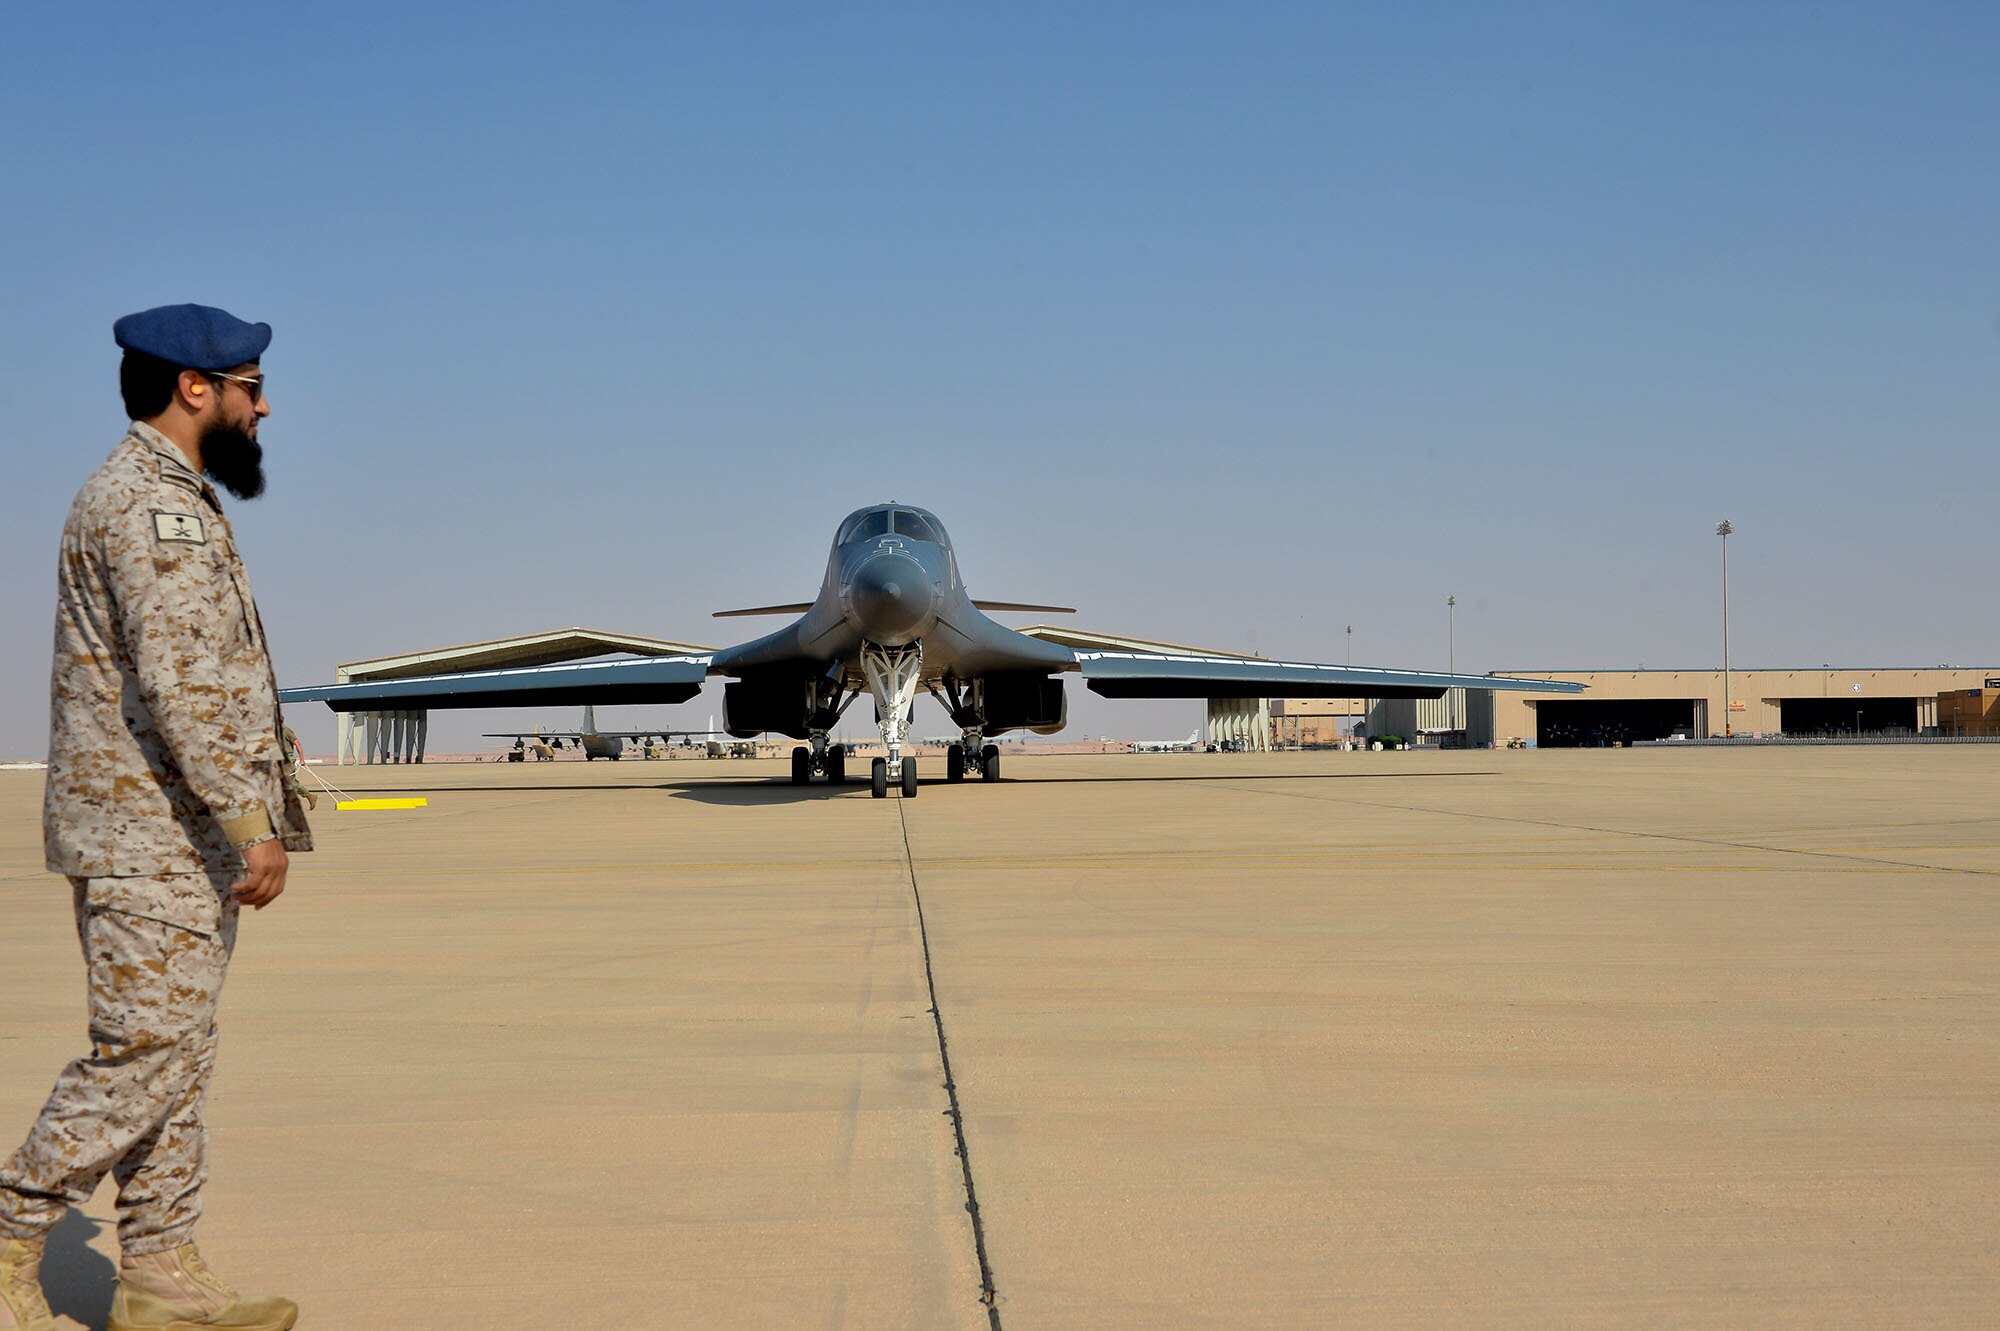 The B1-B Lancer from Ellsworth Air Force Base touches down at Prince Sultan Air Base, Kingdom of Saudi Arabia, Oct. 25, 2109.